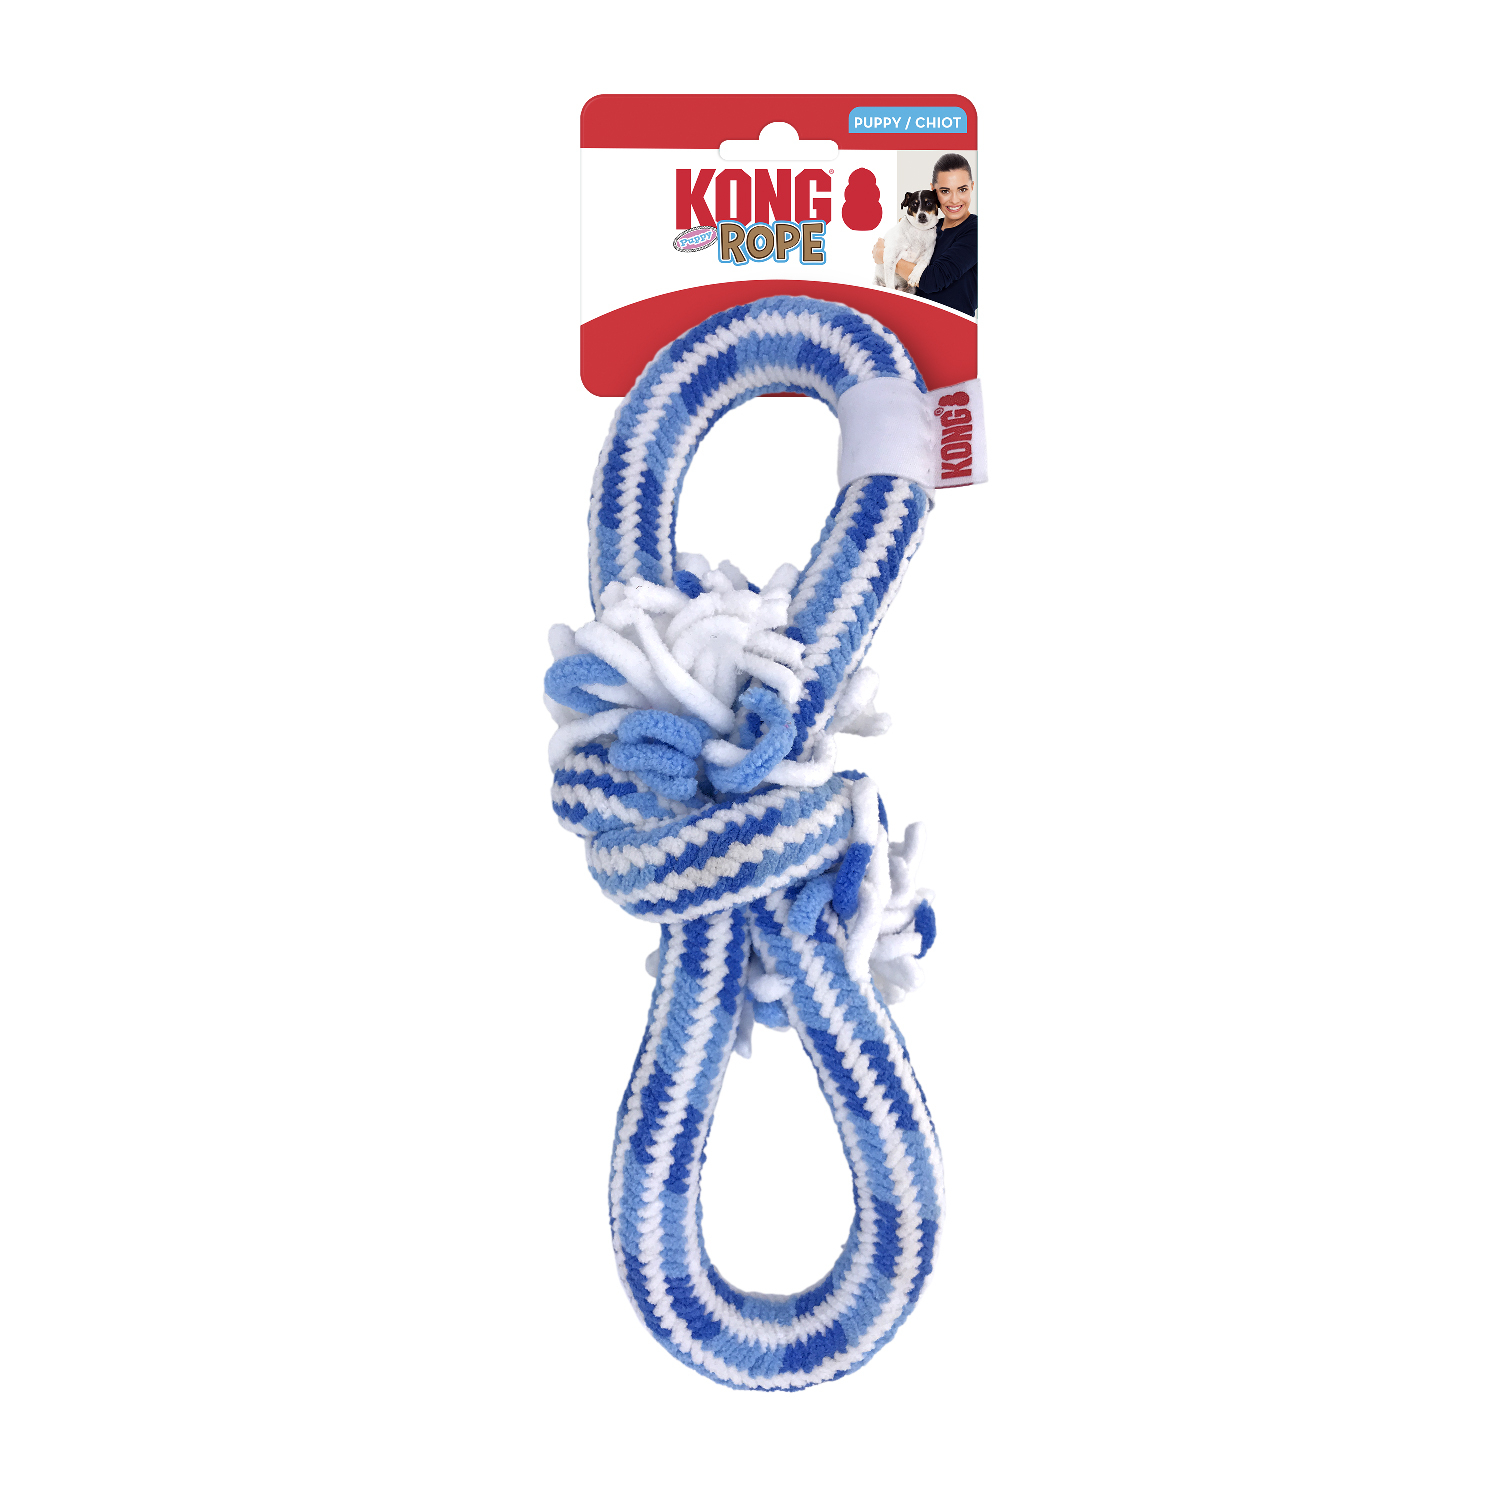 KONG Rope Tug assorti pour chiot